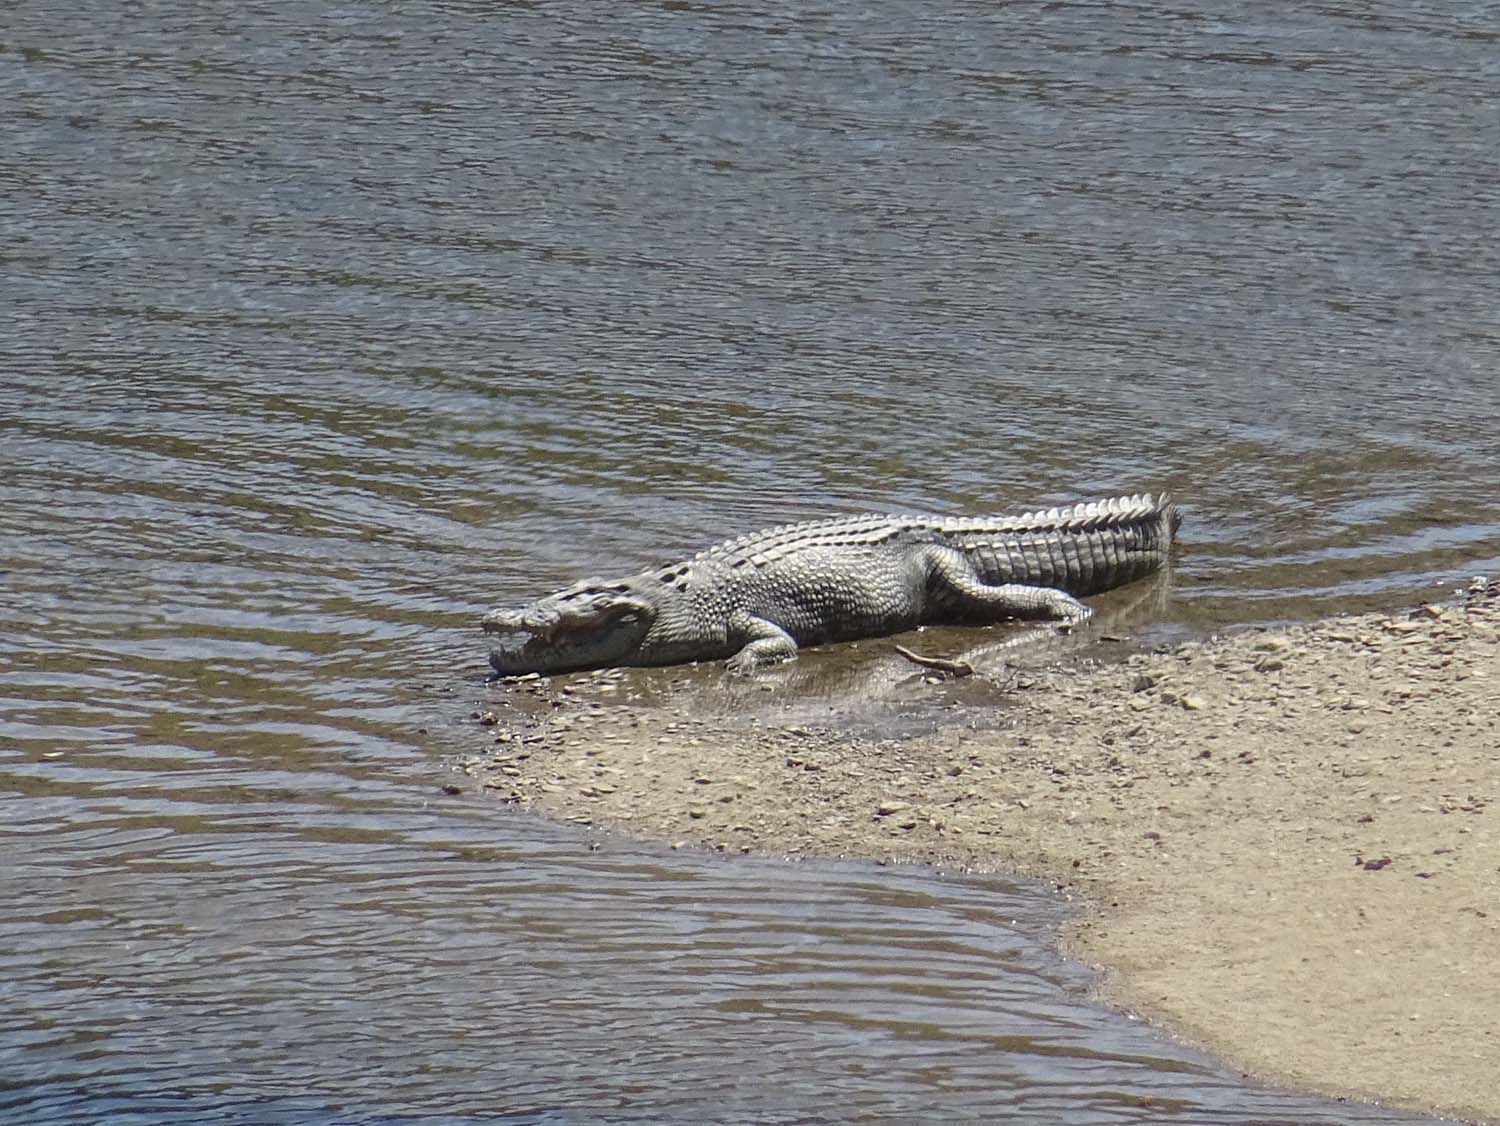 a large saltie sunning itself on the bank of the Bloomfield River